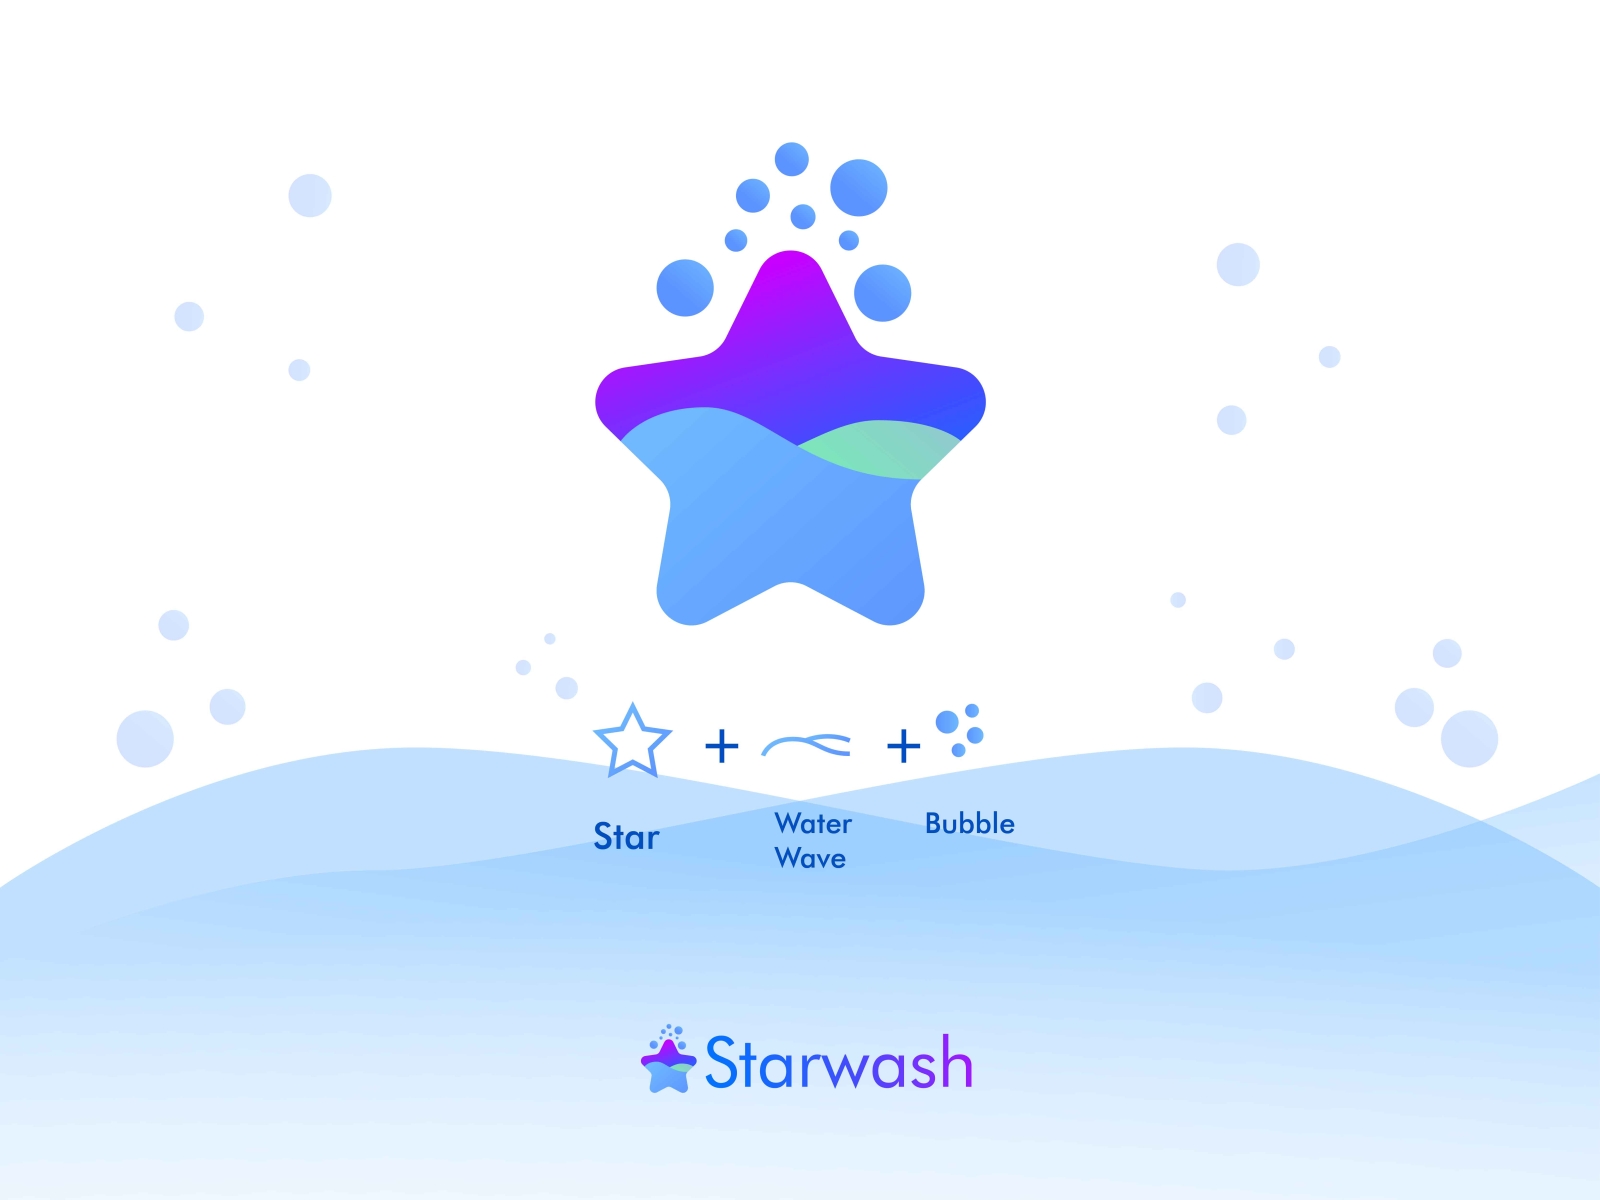 Starwash App Project The Logo By Ideaver Digital On Dribbble